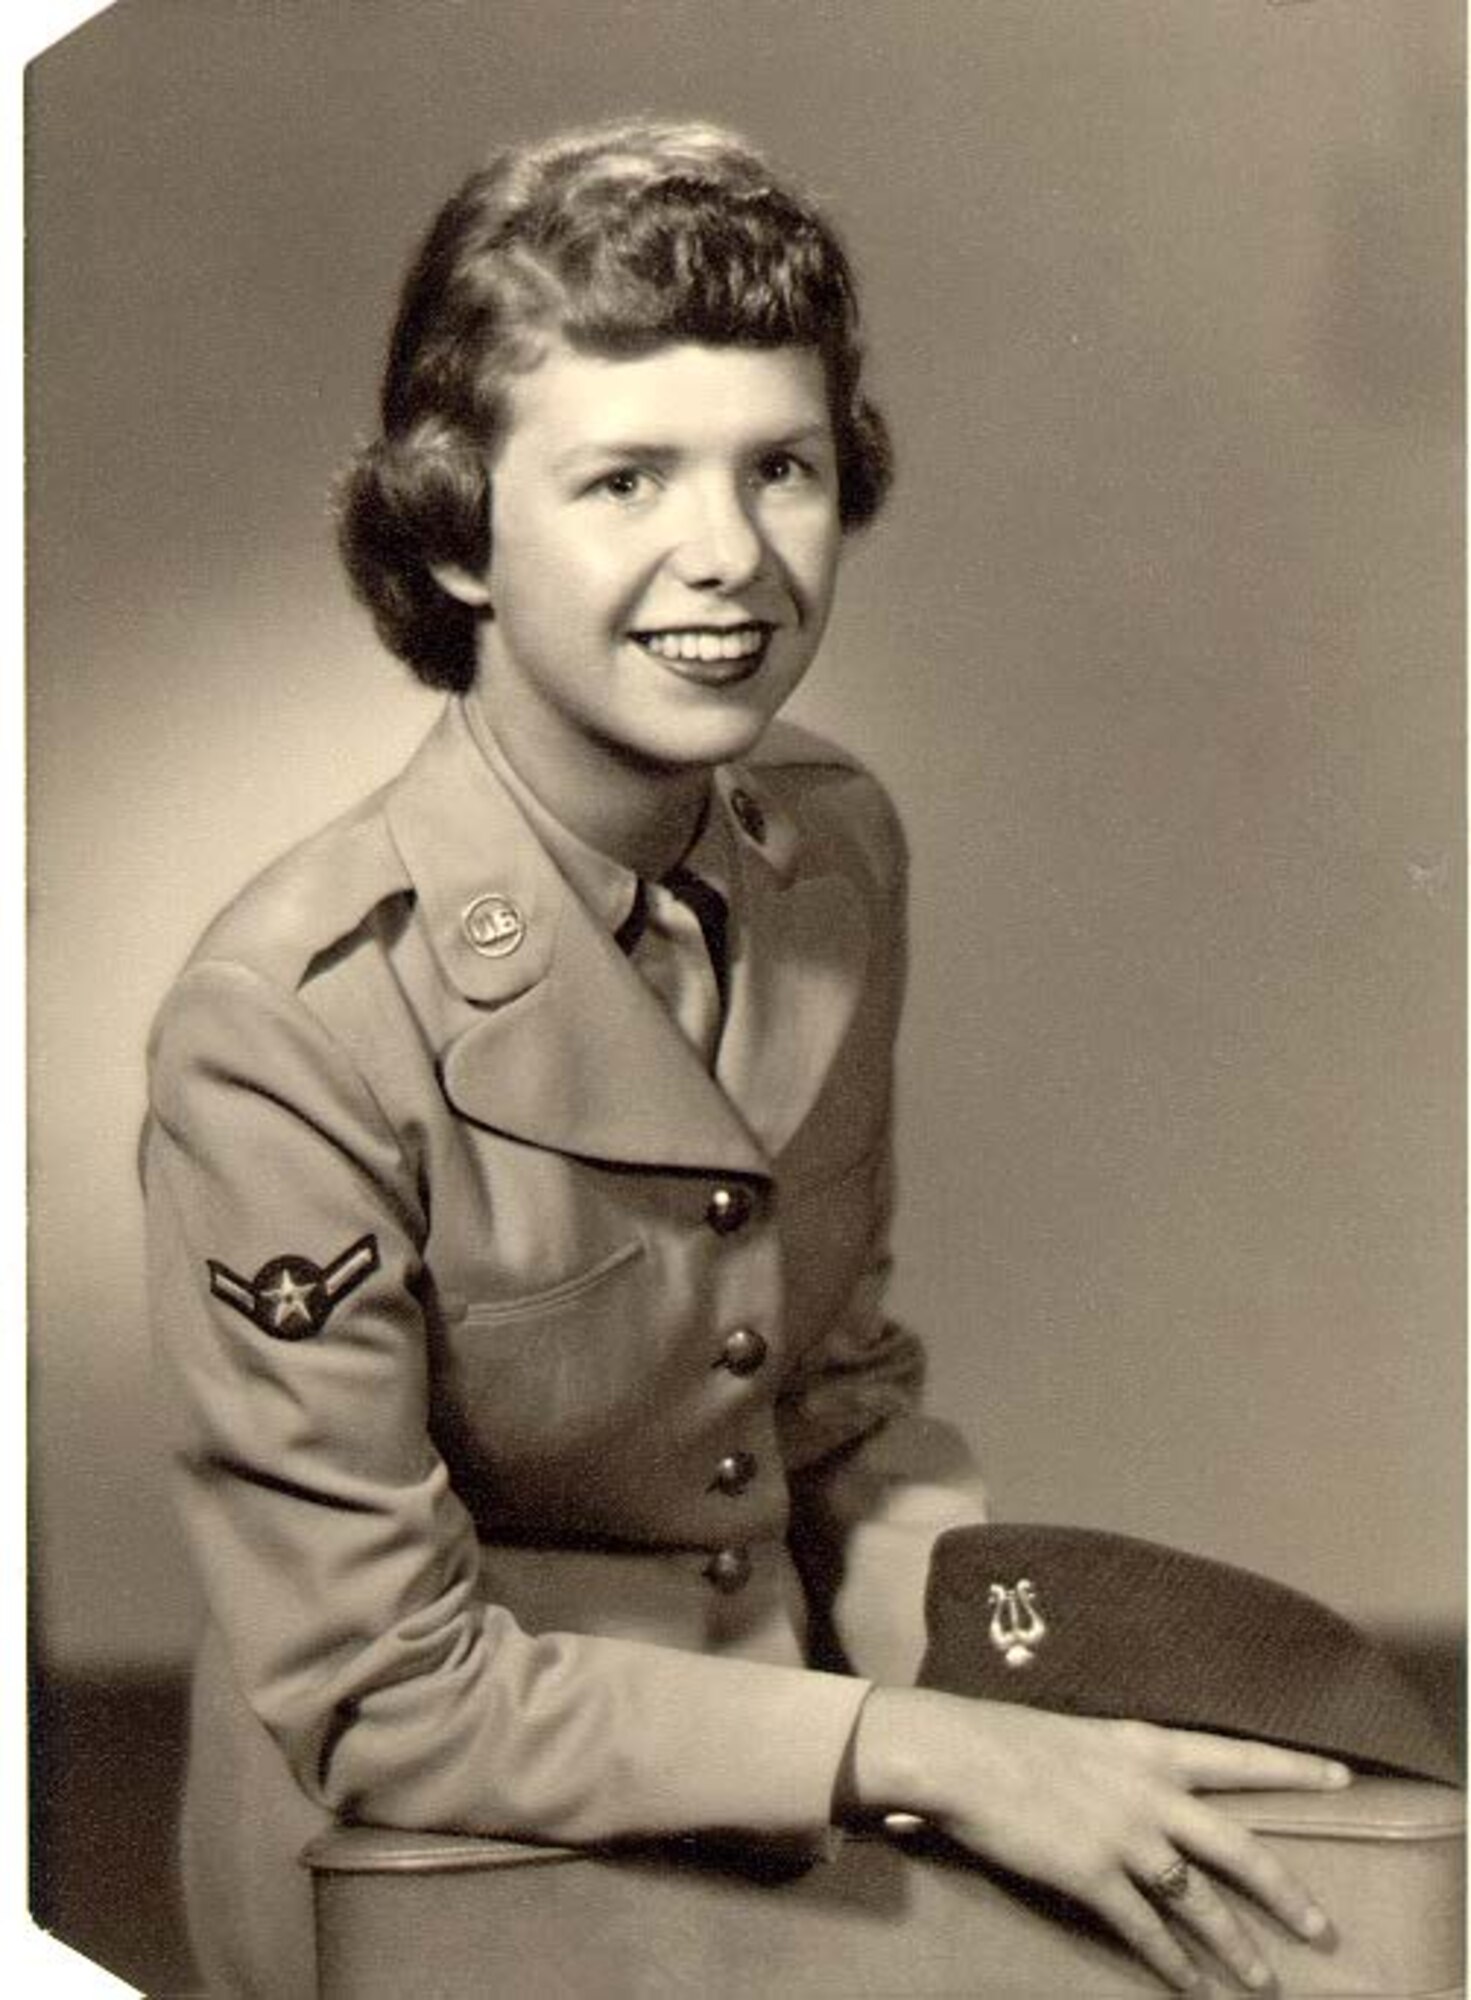 Then, Airman 3rd Class Beverly Richards, served as a clarinetist in the Women in the Air Force Band from 1956 to 1959. Mrs. Passwaters attended the U.S. Air Force Band of the Golden West performance June 8, 2014, in Corvallis, Oregon. (Courtesy photo)